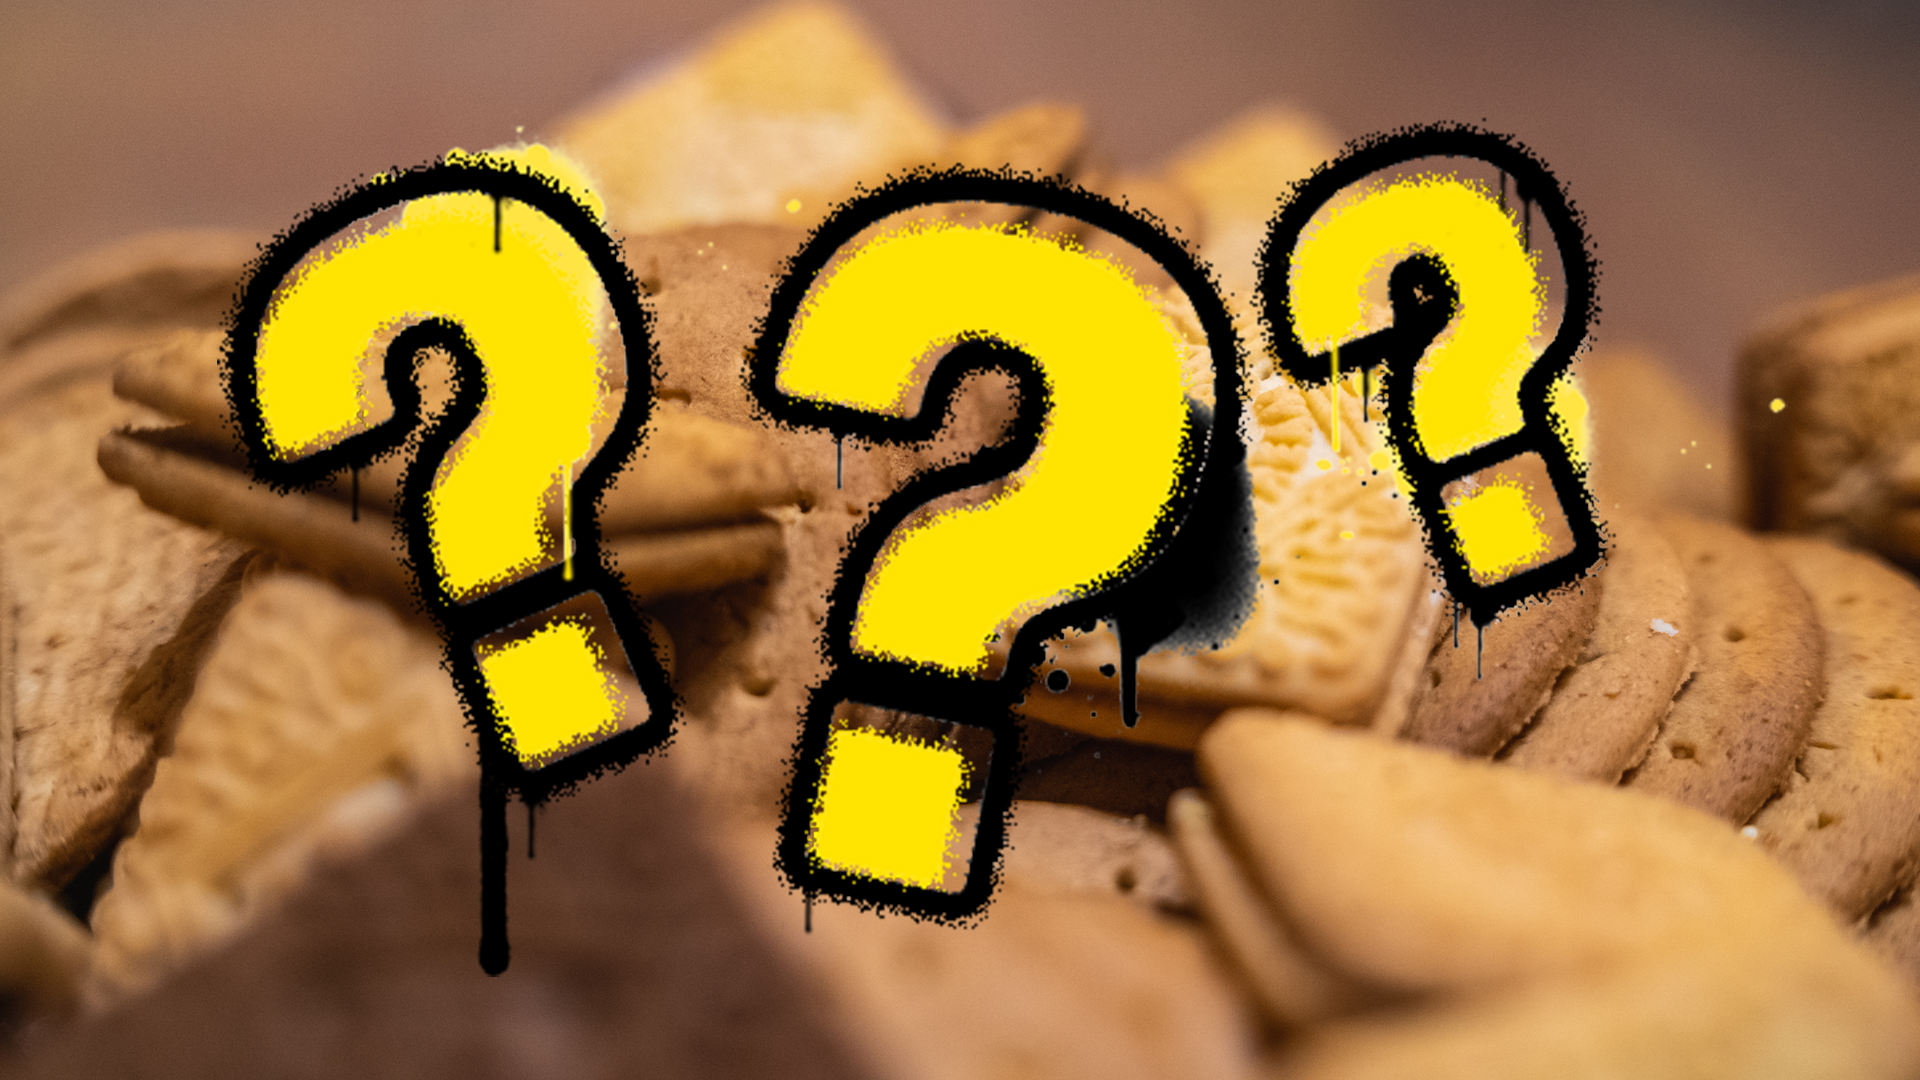 Some biscuits and question marks